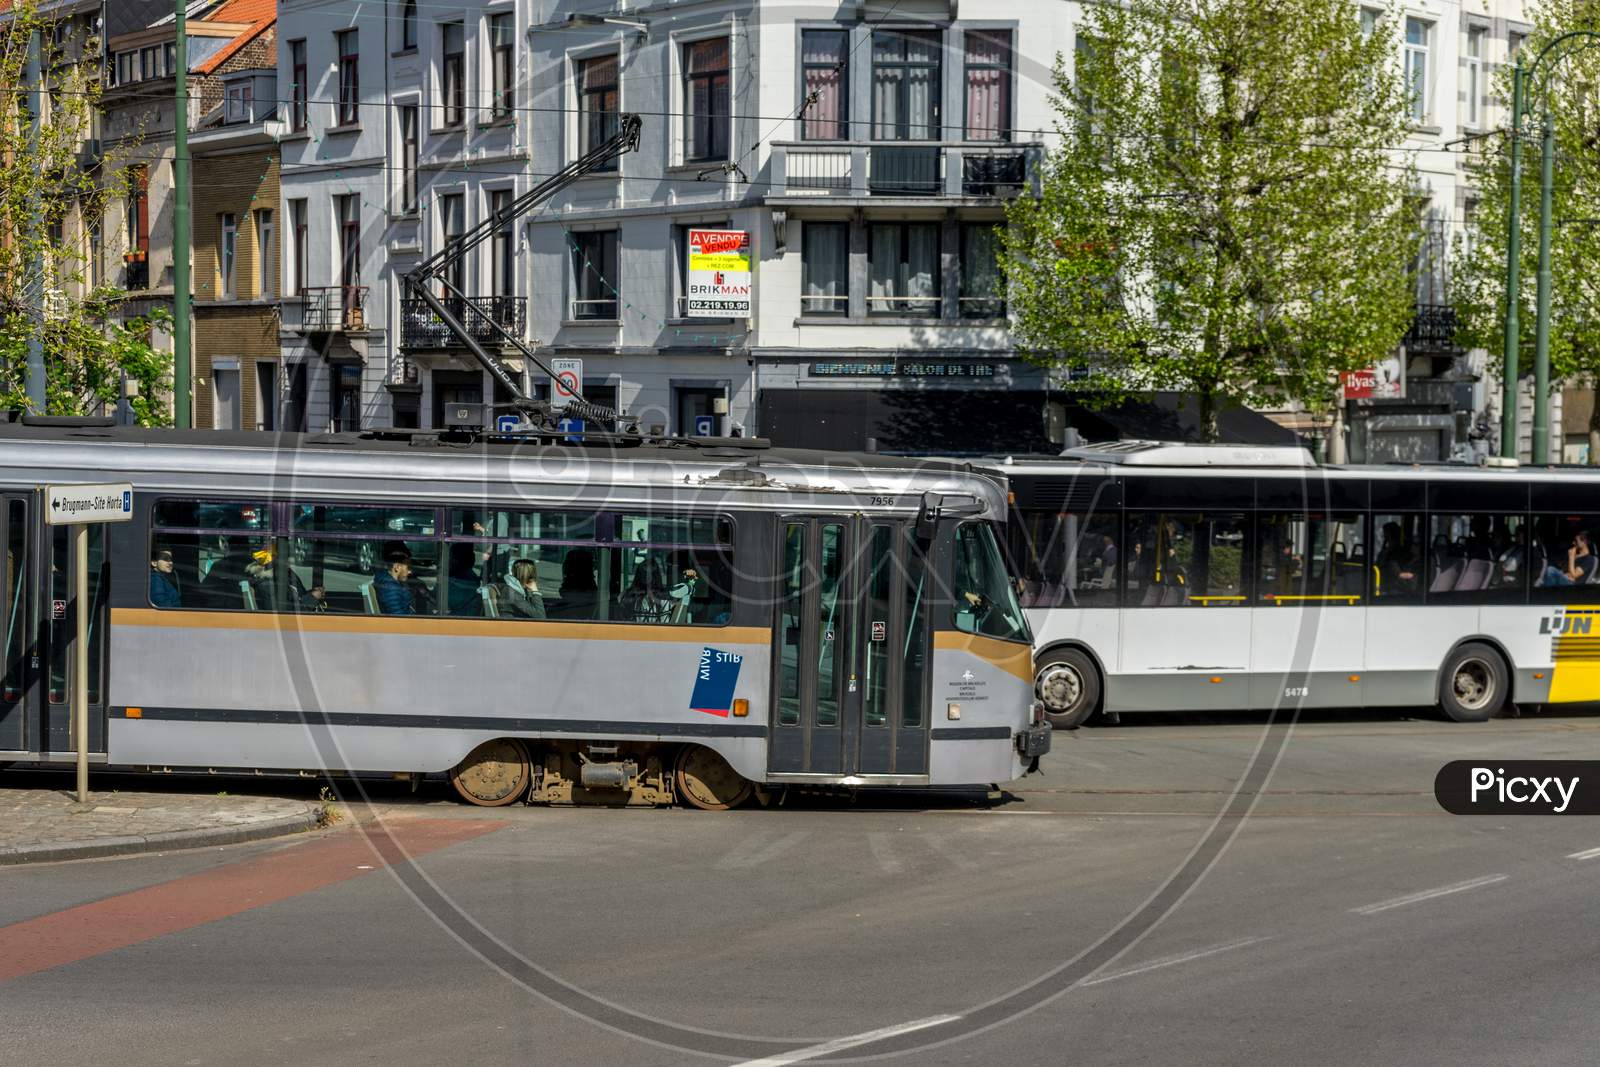 Brussels, Belgium - April 2017: A Tram And A Bus Cross Each Other In The City Of Brussels, Belgium